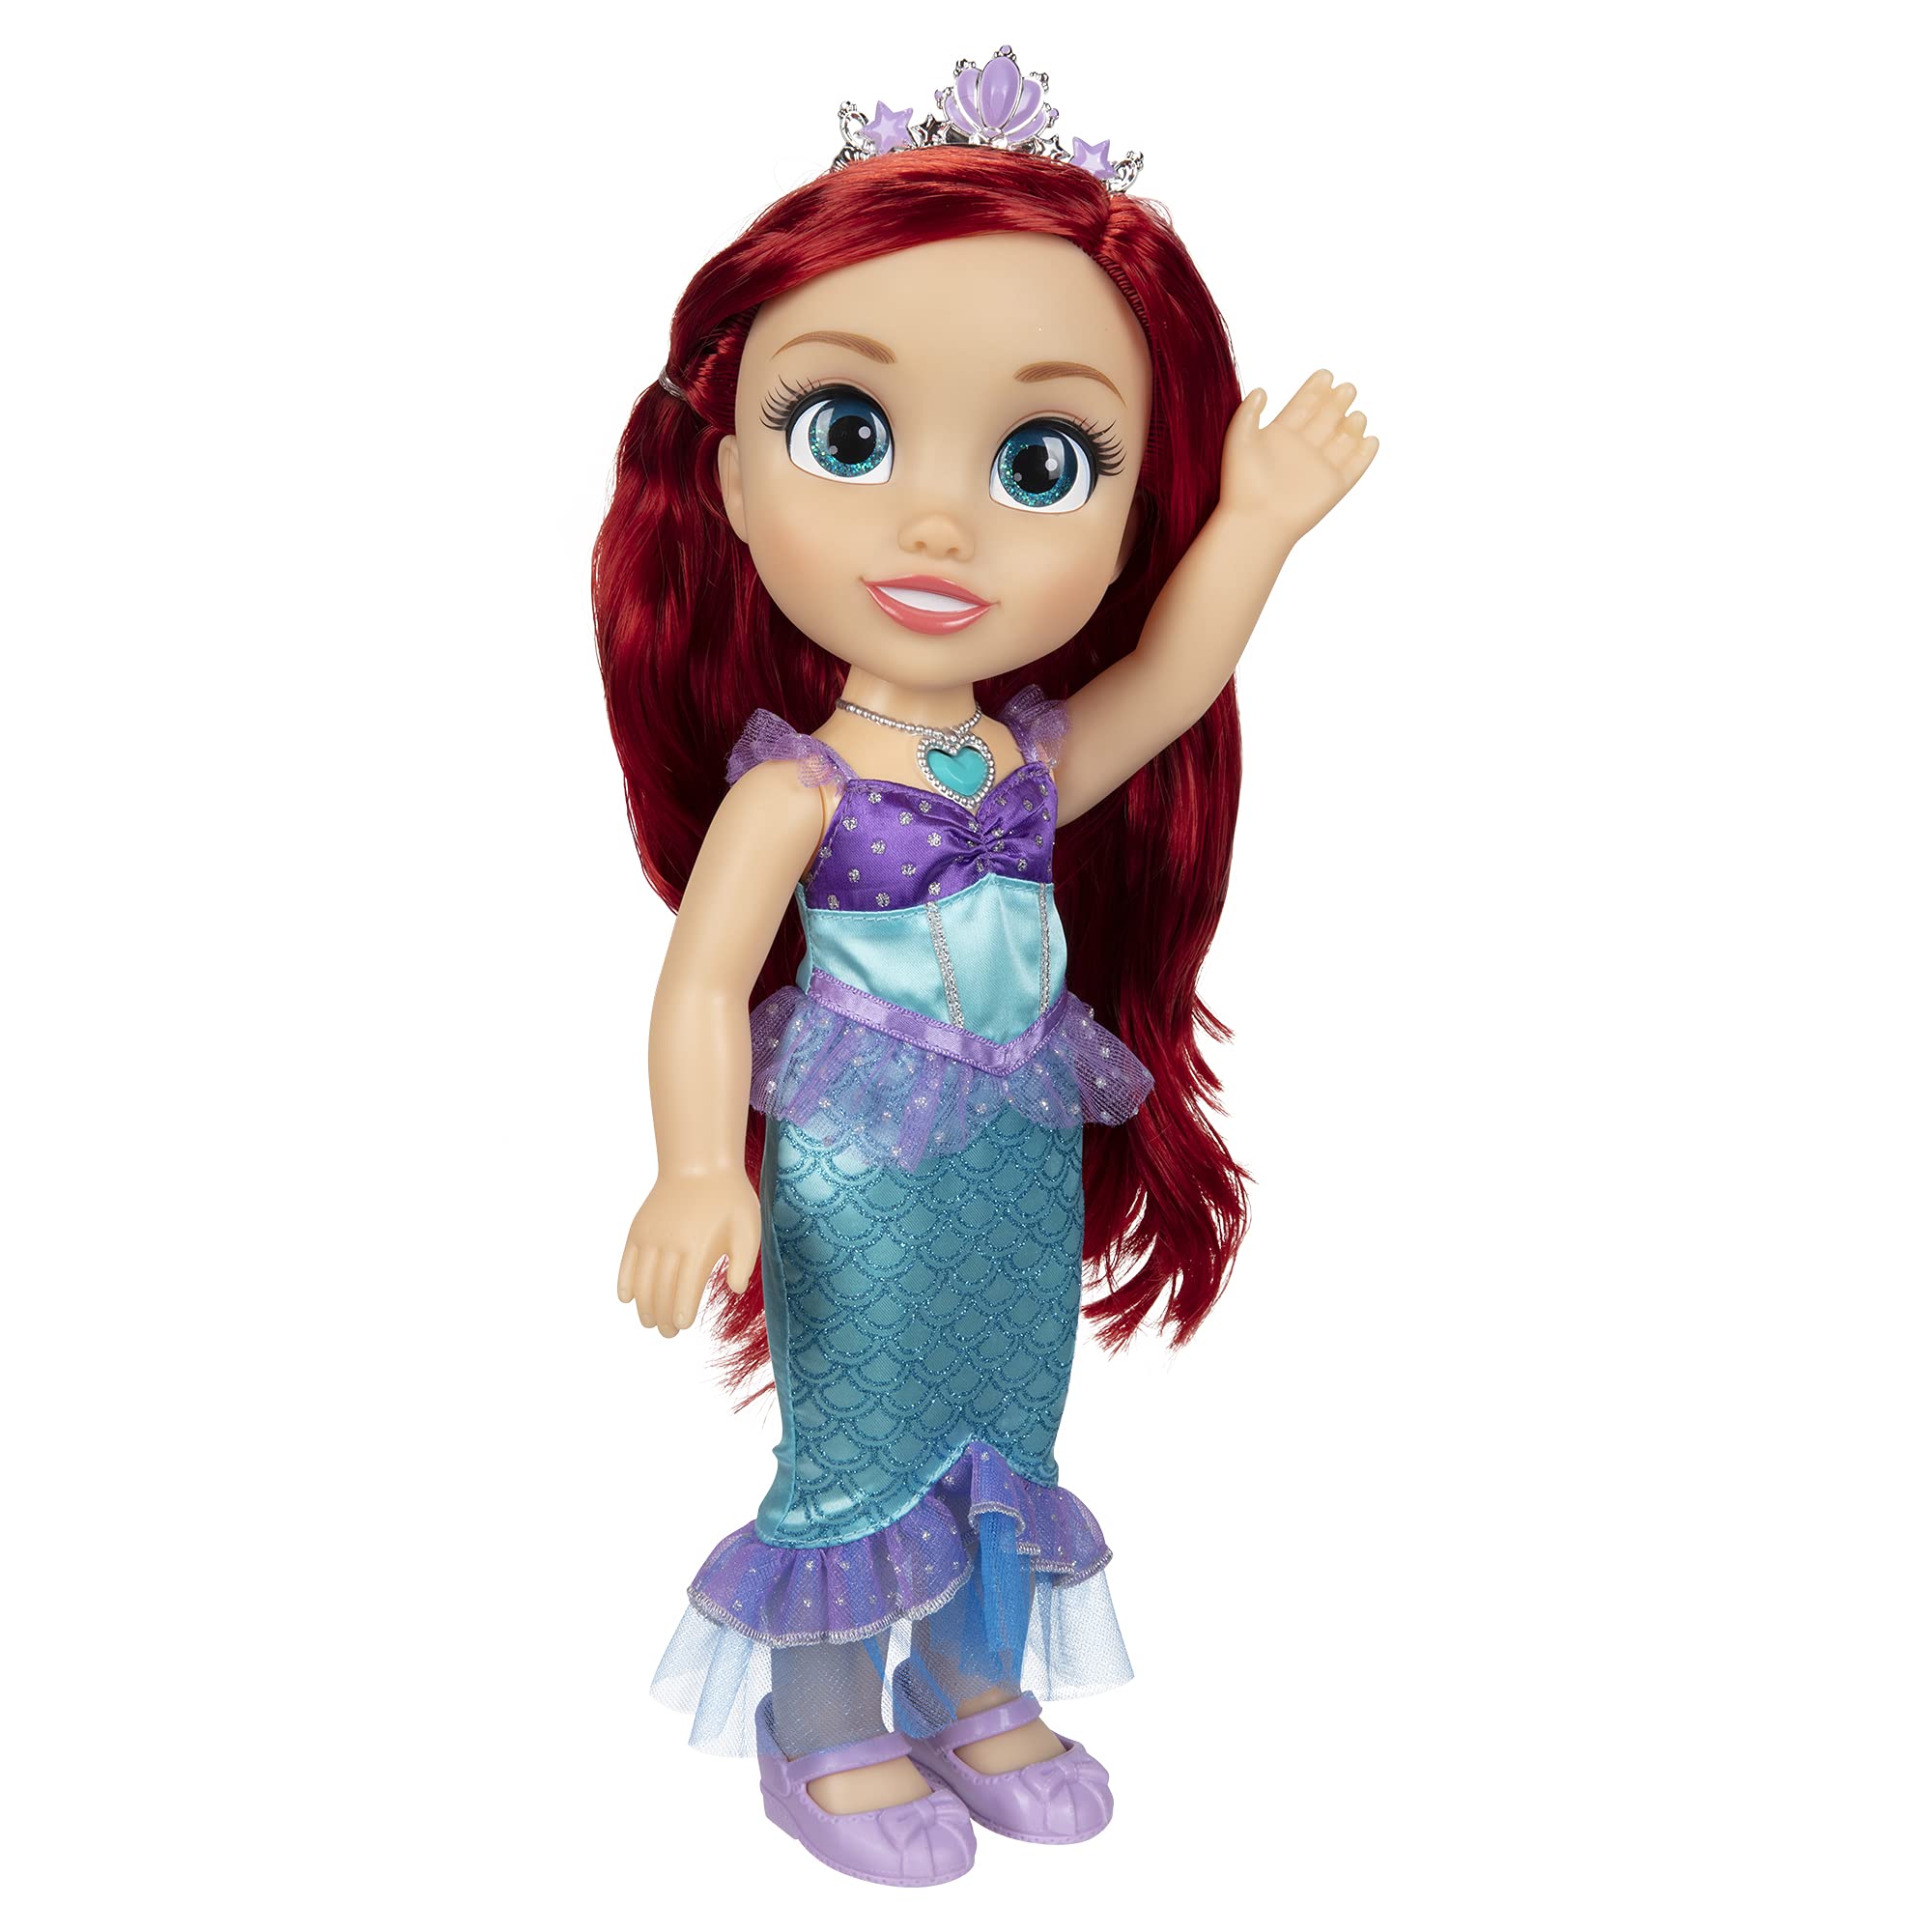 Disney Princess Ariel Doll Sing & Shimmer Toddler Doll, Sings Part of Your World [Amazon Exclusive]